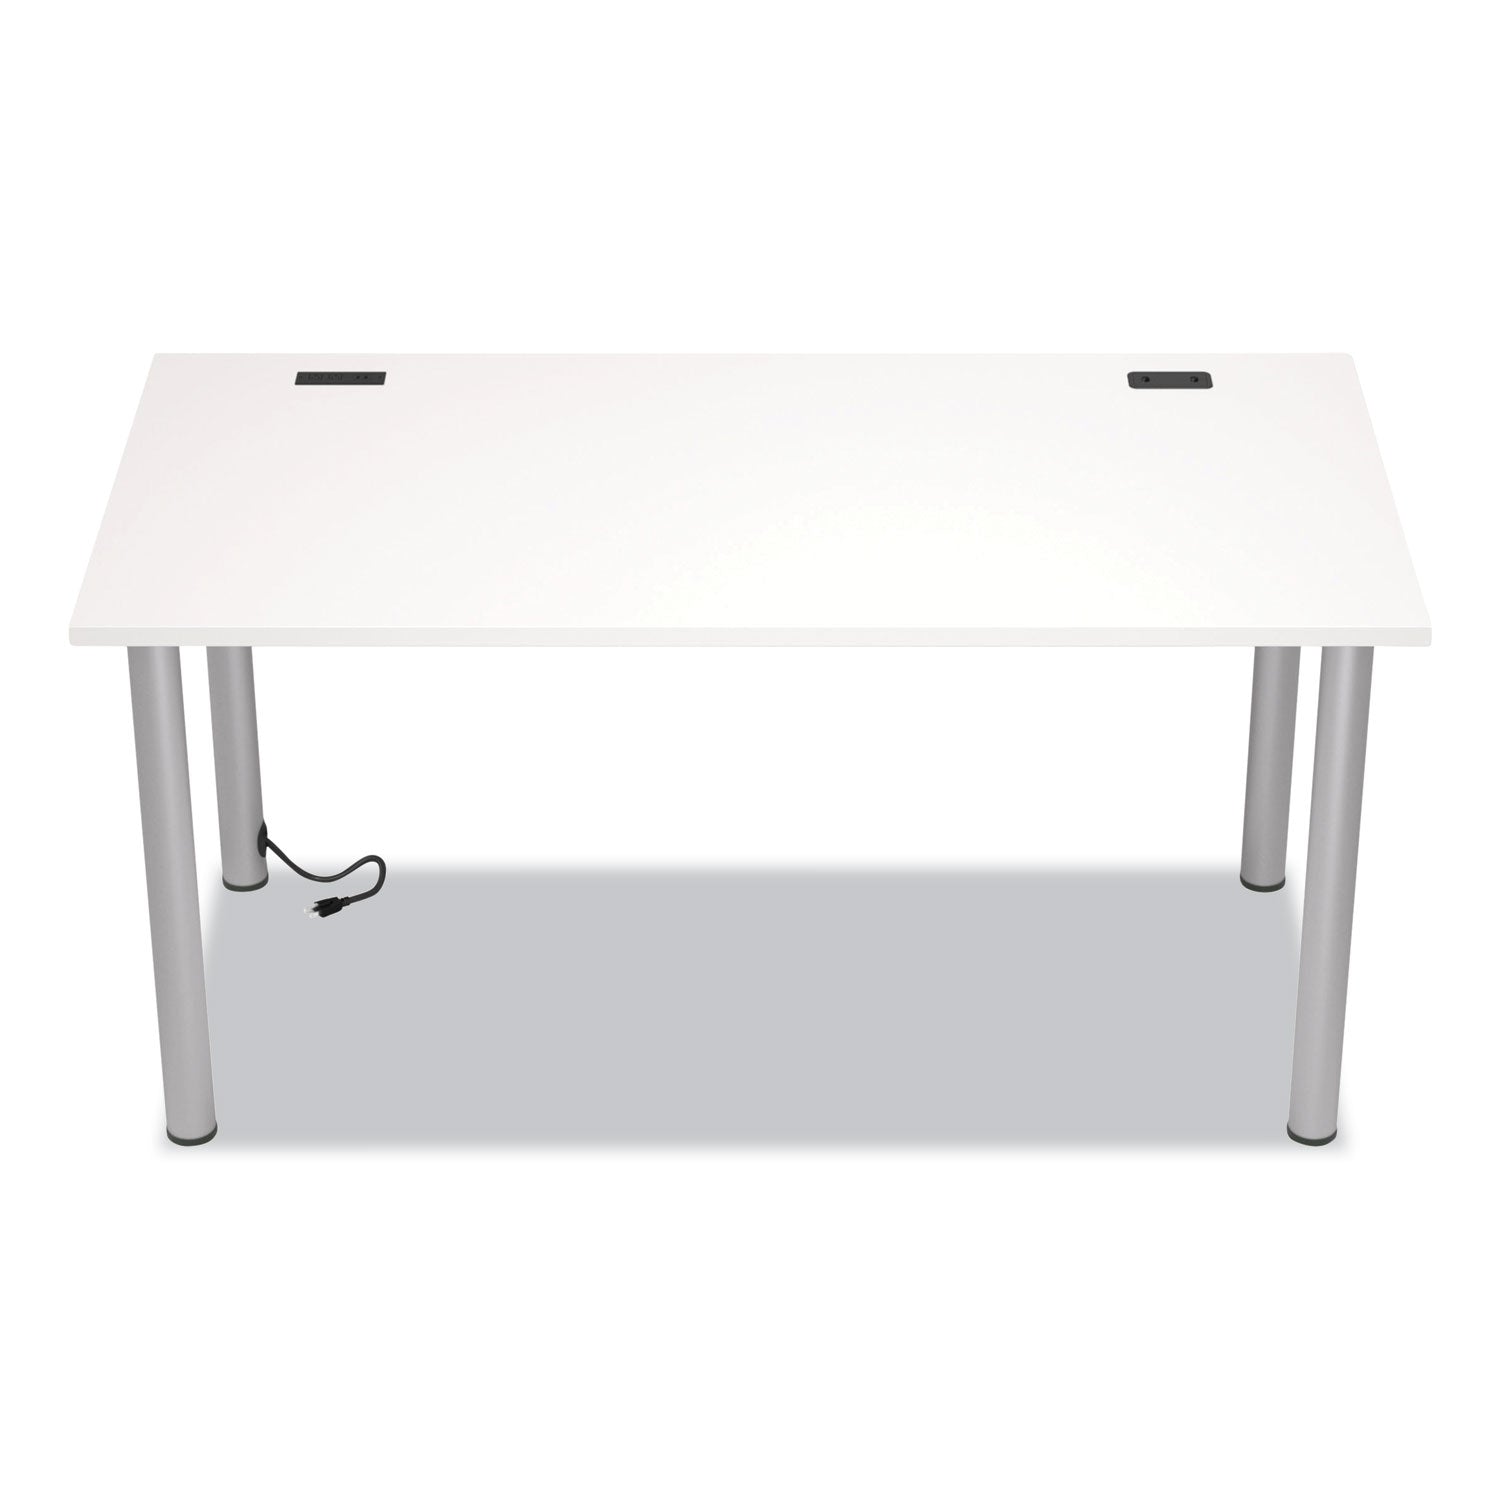 essentials-writing-table-desk-with-integrated-power-management-597-x-293-x-288-white-aluminum_uos24398966 - 2